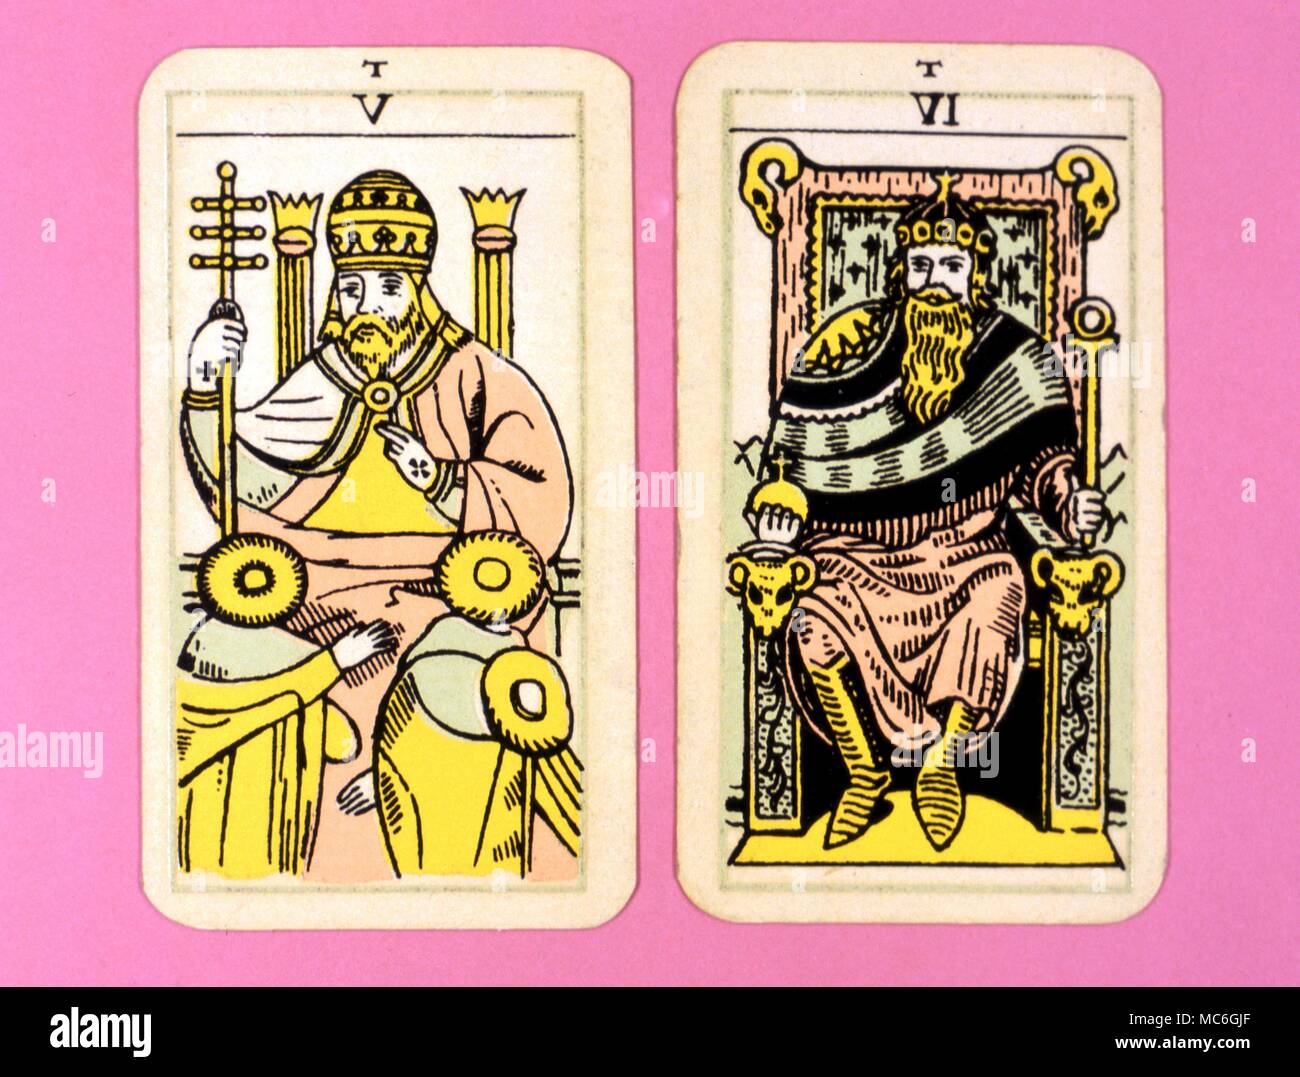 Tarot Cards-Majo Arcana- The Parisian Tarot. Card 4. The Emperor, and Card 5. The Pope. Two cards from a Major Arcana picture Tarot, probably designed in an archaizing style in loose imitation of the Rosicrucian deck designed by Pamela Coleman Smith, alongside A.E.Waite, and various earlier decks, such as that published by Encausse (Papus) in The Tarot of the Bohemians at the end of the 19th century, post 1905, but earlier than 1912. The name Parisian Tarot was given by the owner of the deck - it might however be called the Tau Tarot, from the intriguing letter Tau at the head of each card. Stock Photo